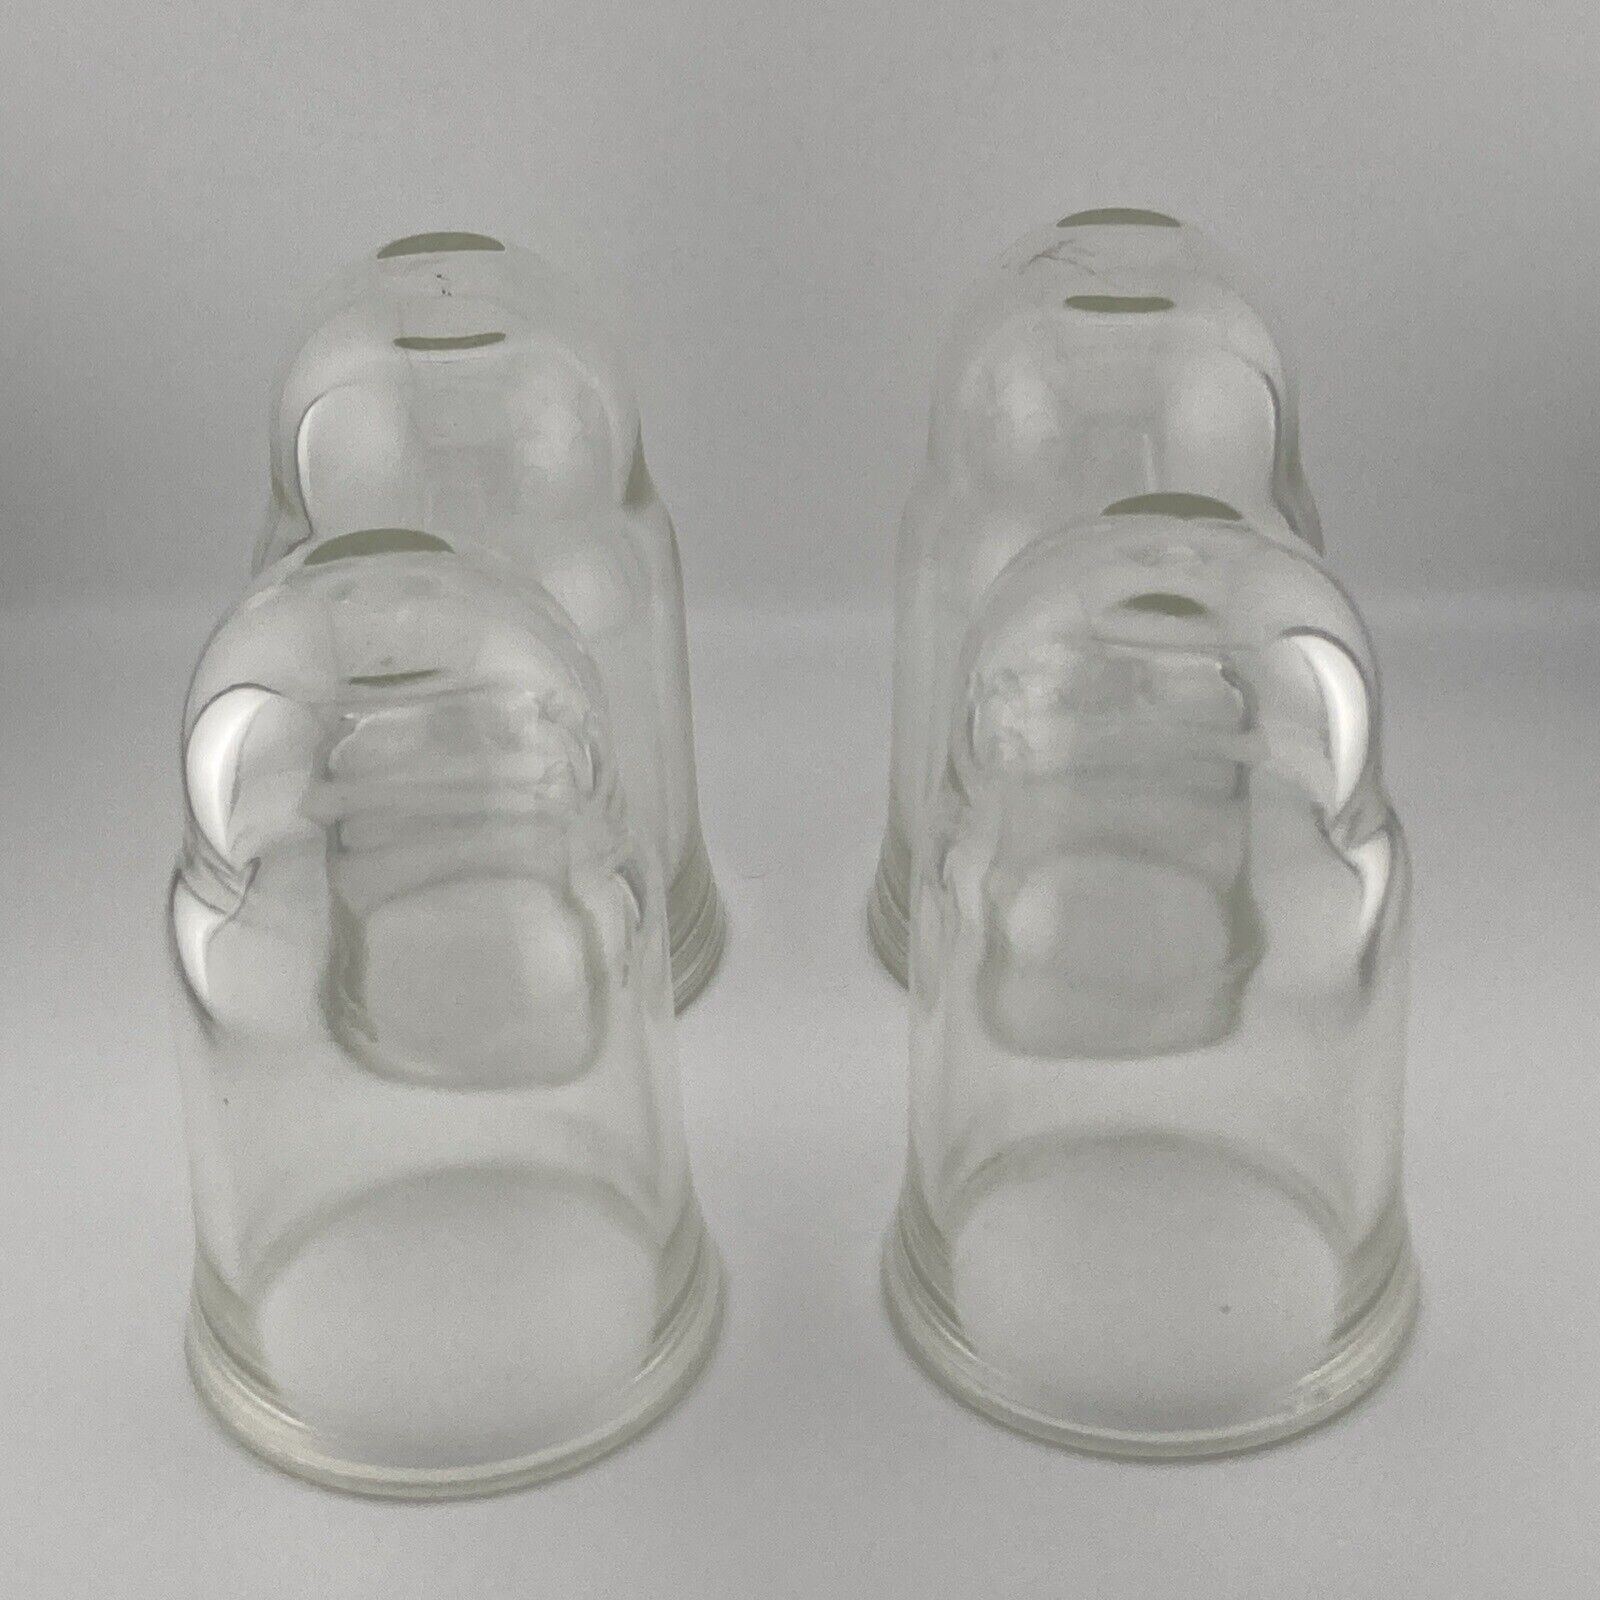 Set of 3 Vintage Glass Fuel Filter Glass Bowls Small Dome Mini Clear Cloche